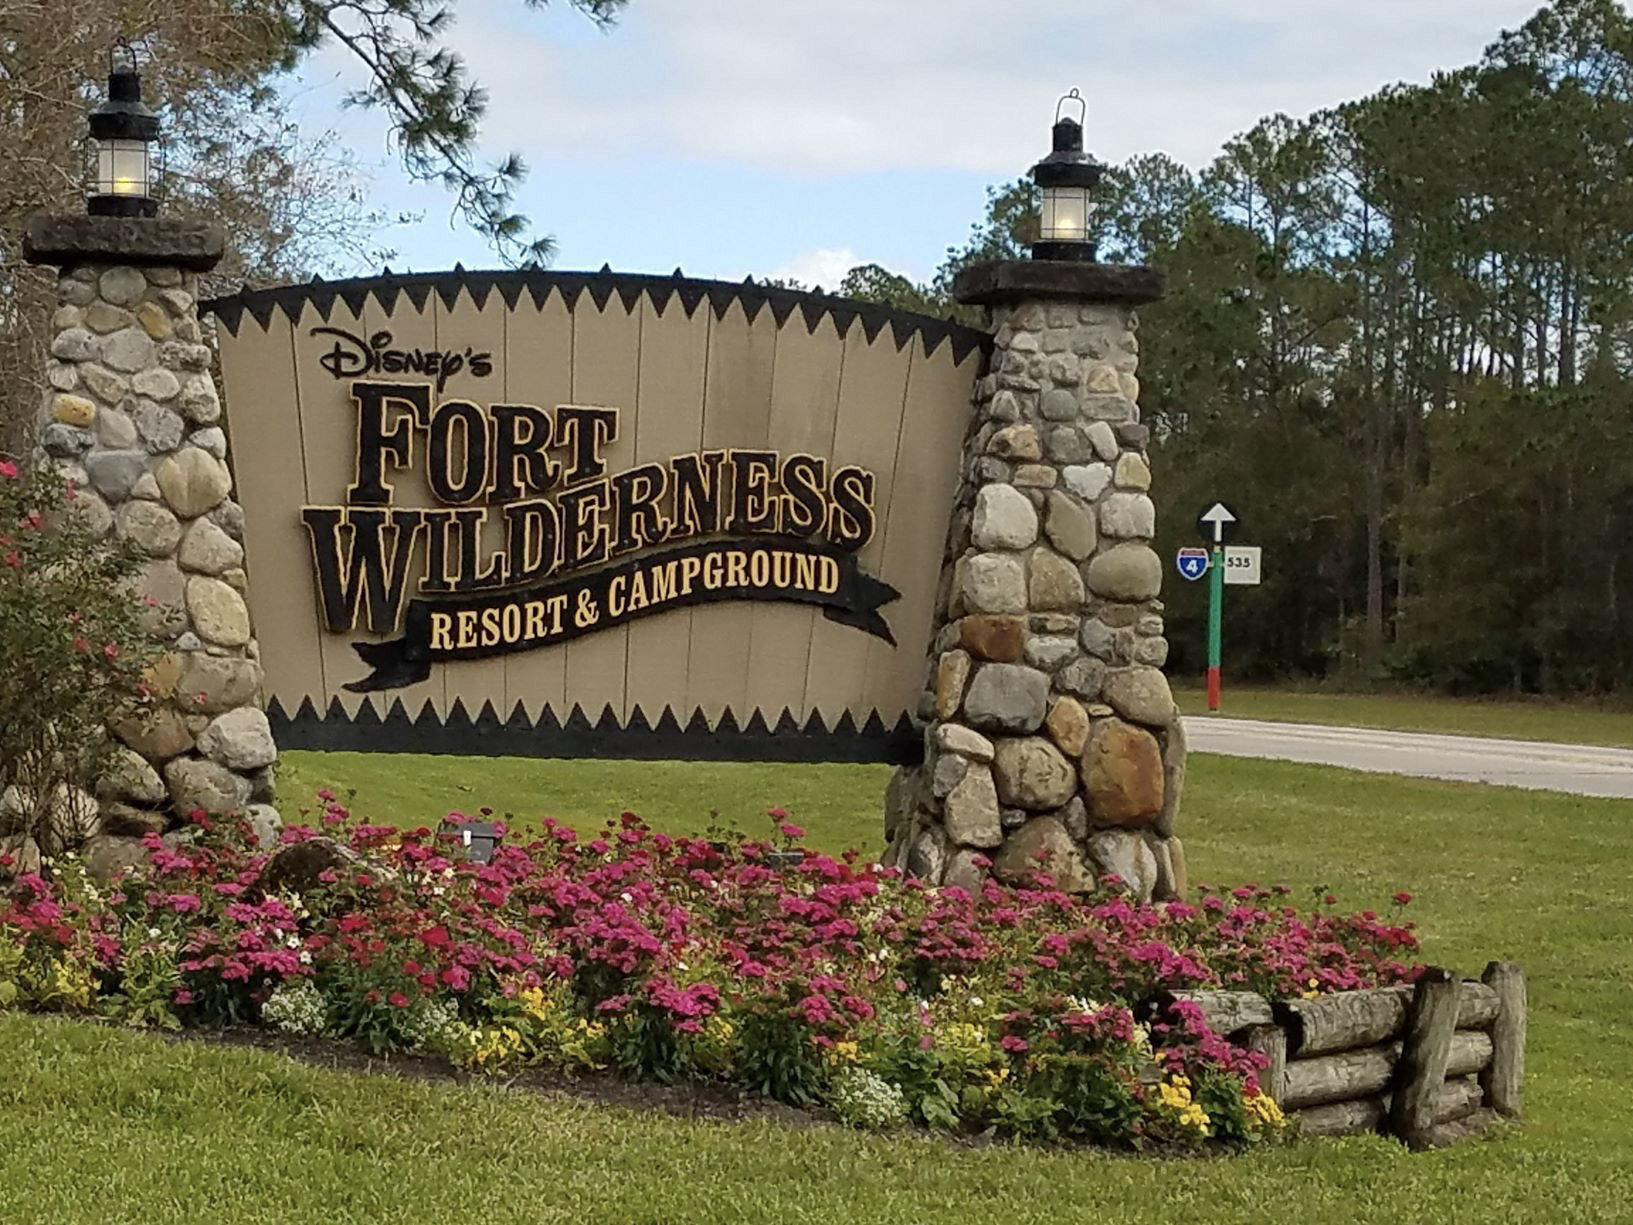 Cabins at Disneys Fort Wilderness Lodge camping moderate book avocation Disney travel agent vacation planning  camper cabin campsite pet friendly resort